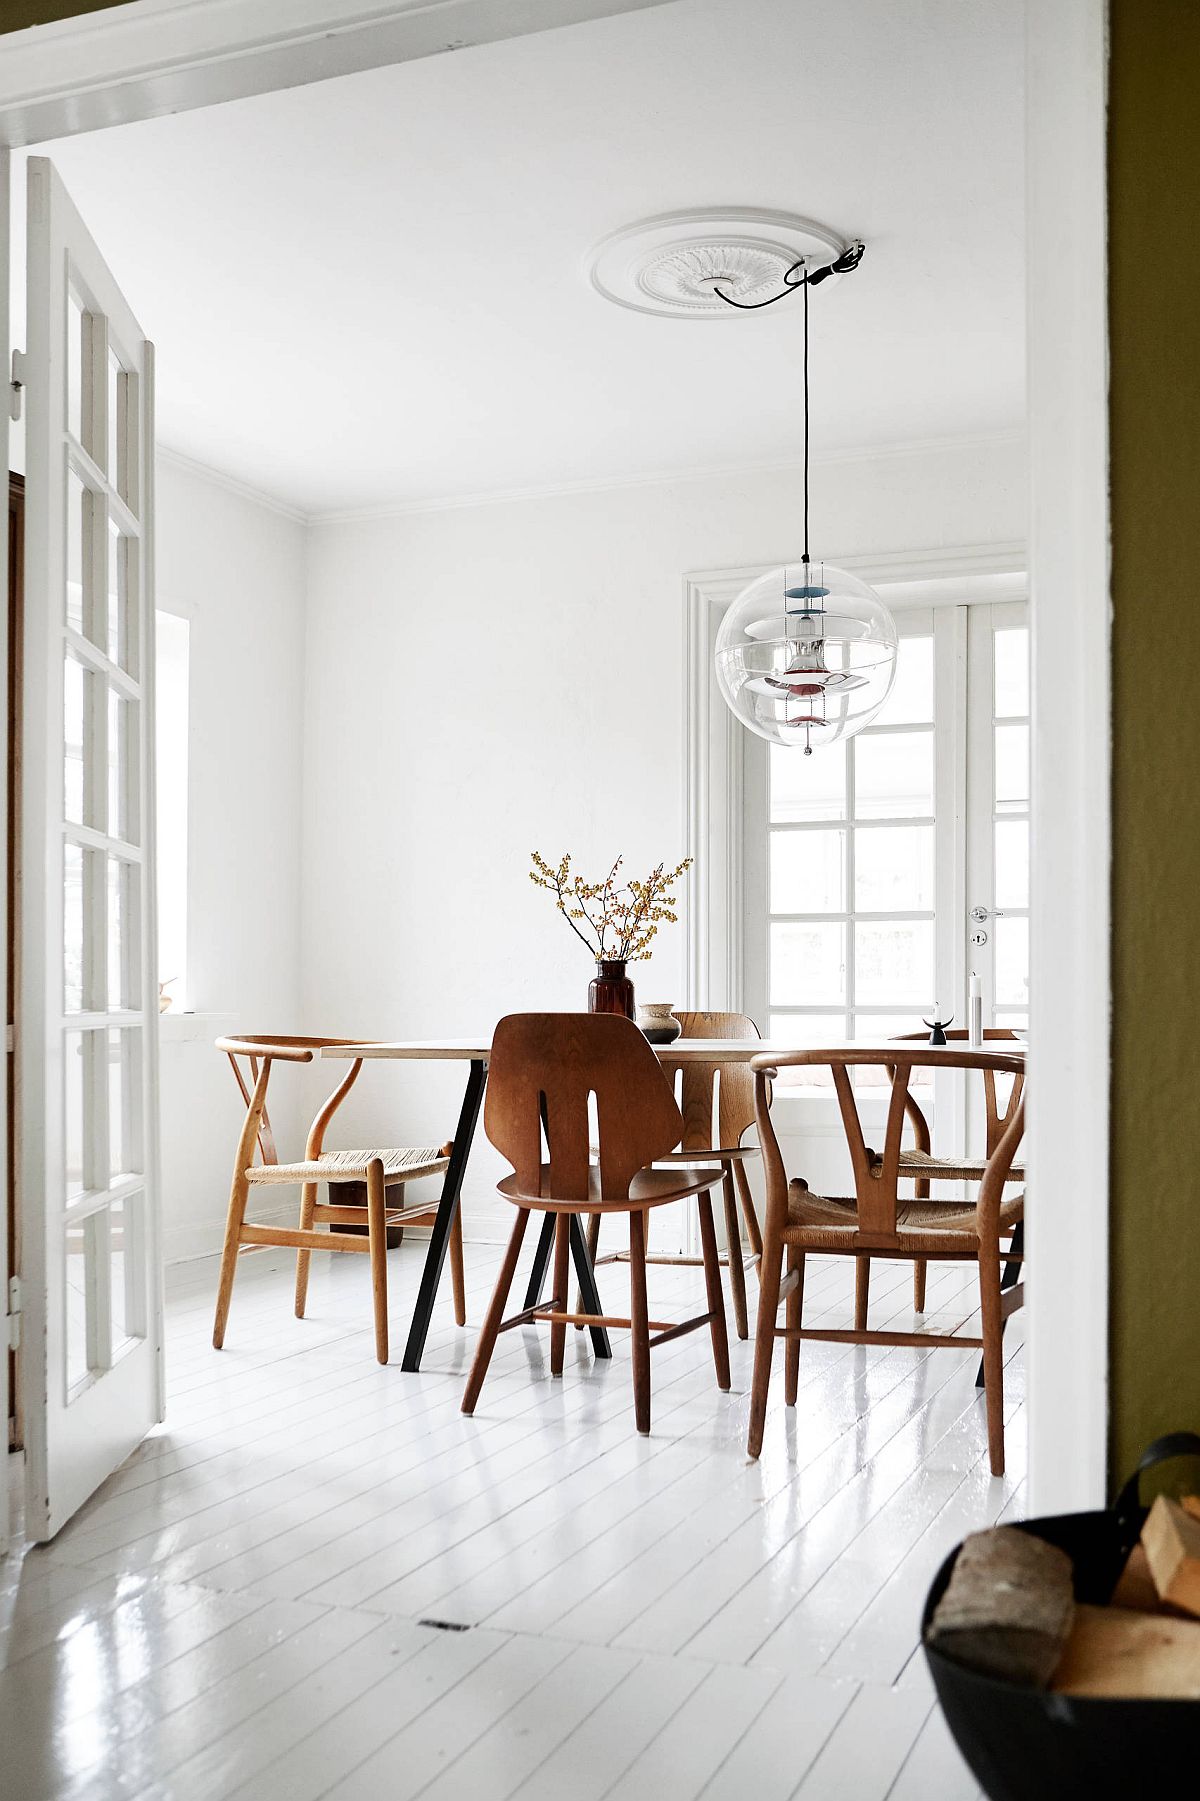 Polished-and-light-filled-Scandinavian-style-dining-room-in-white-and-wood-68719